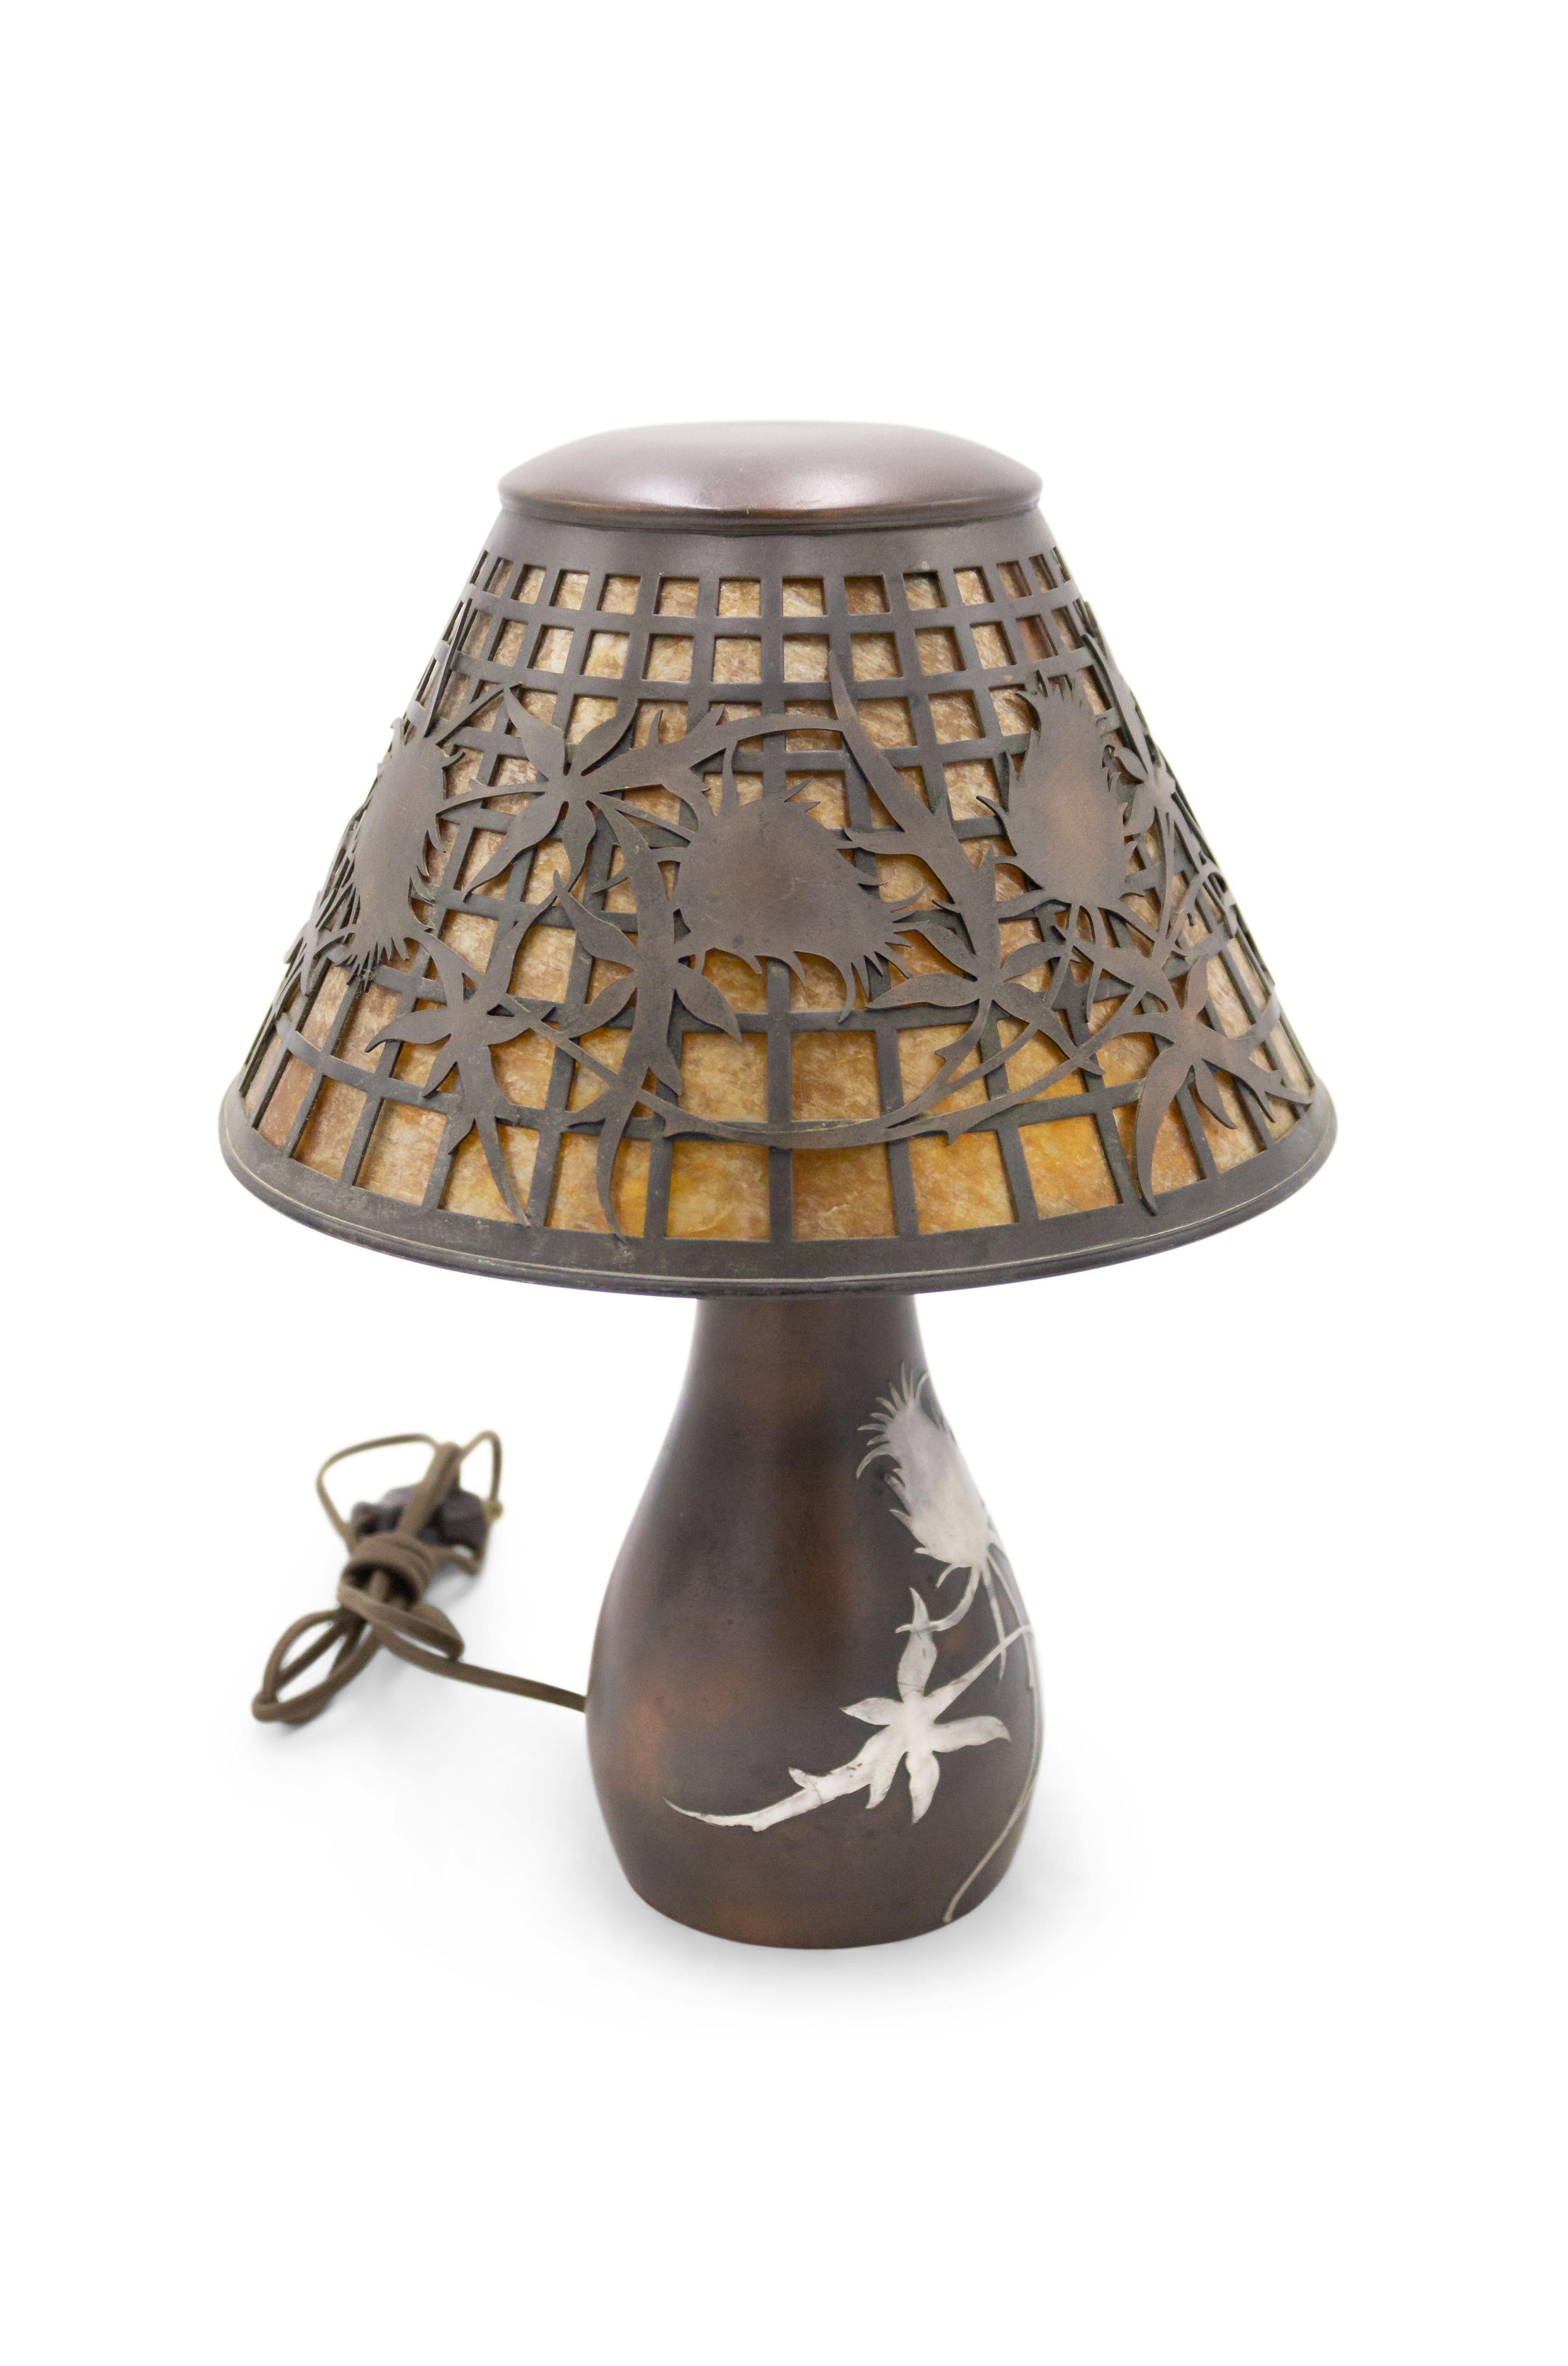 American Mission bronze brown patina table lamp with silver deposit thistle design on base and shade with mica insert (HEINTZ ART METAL).
